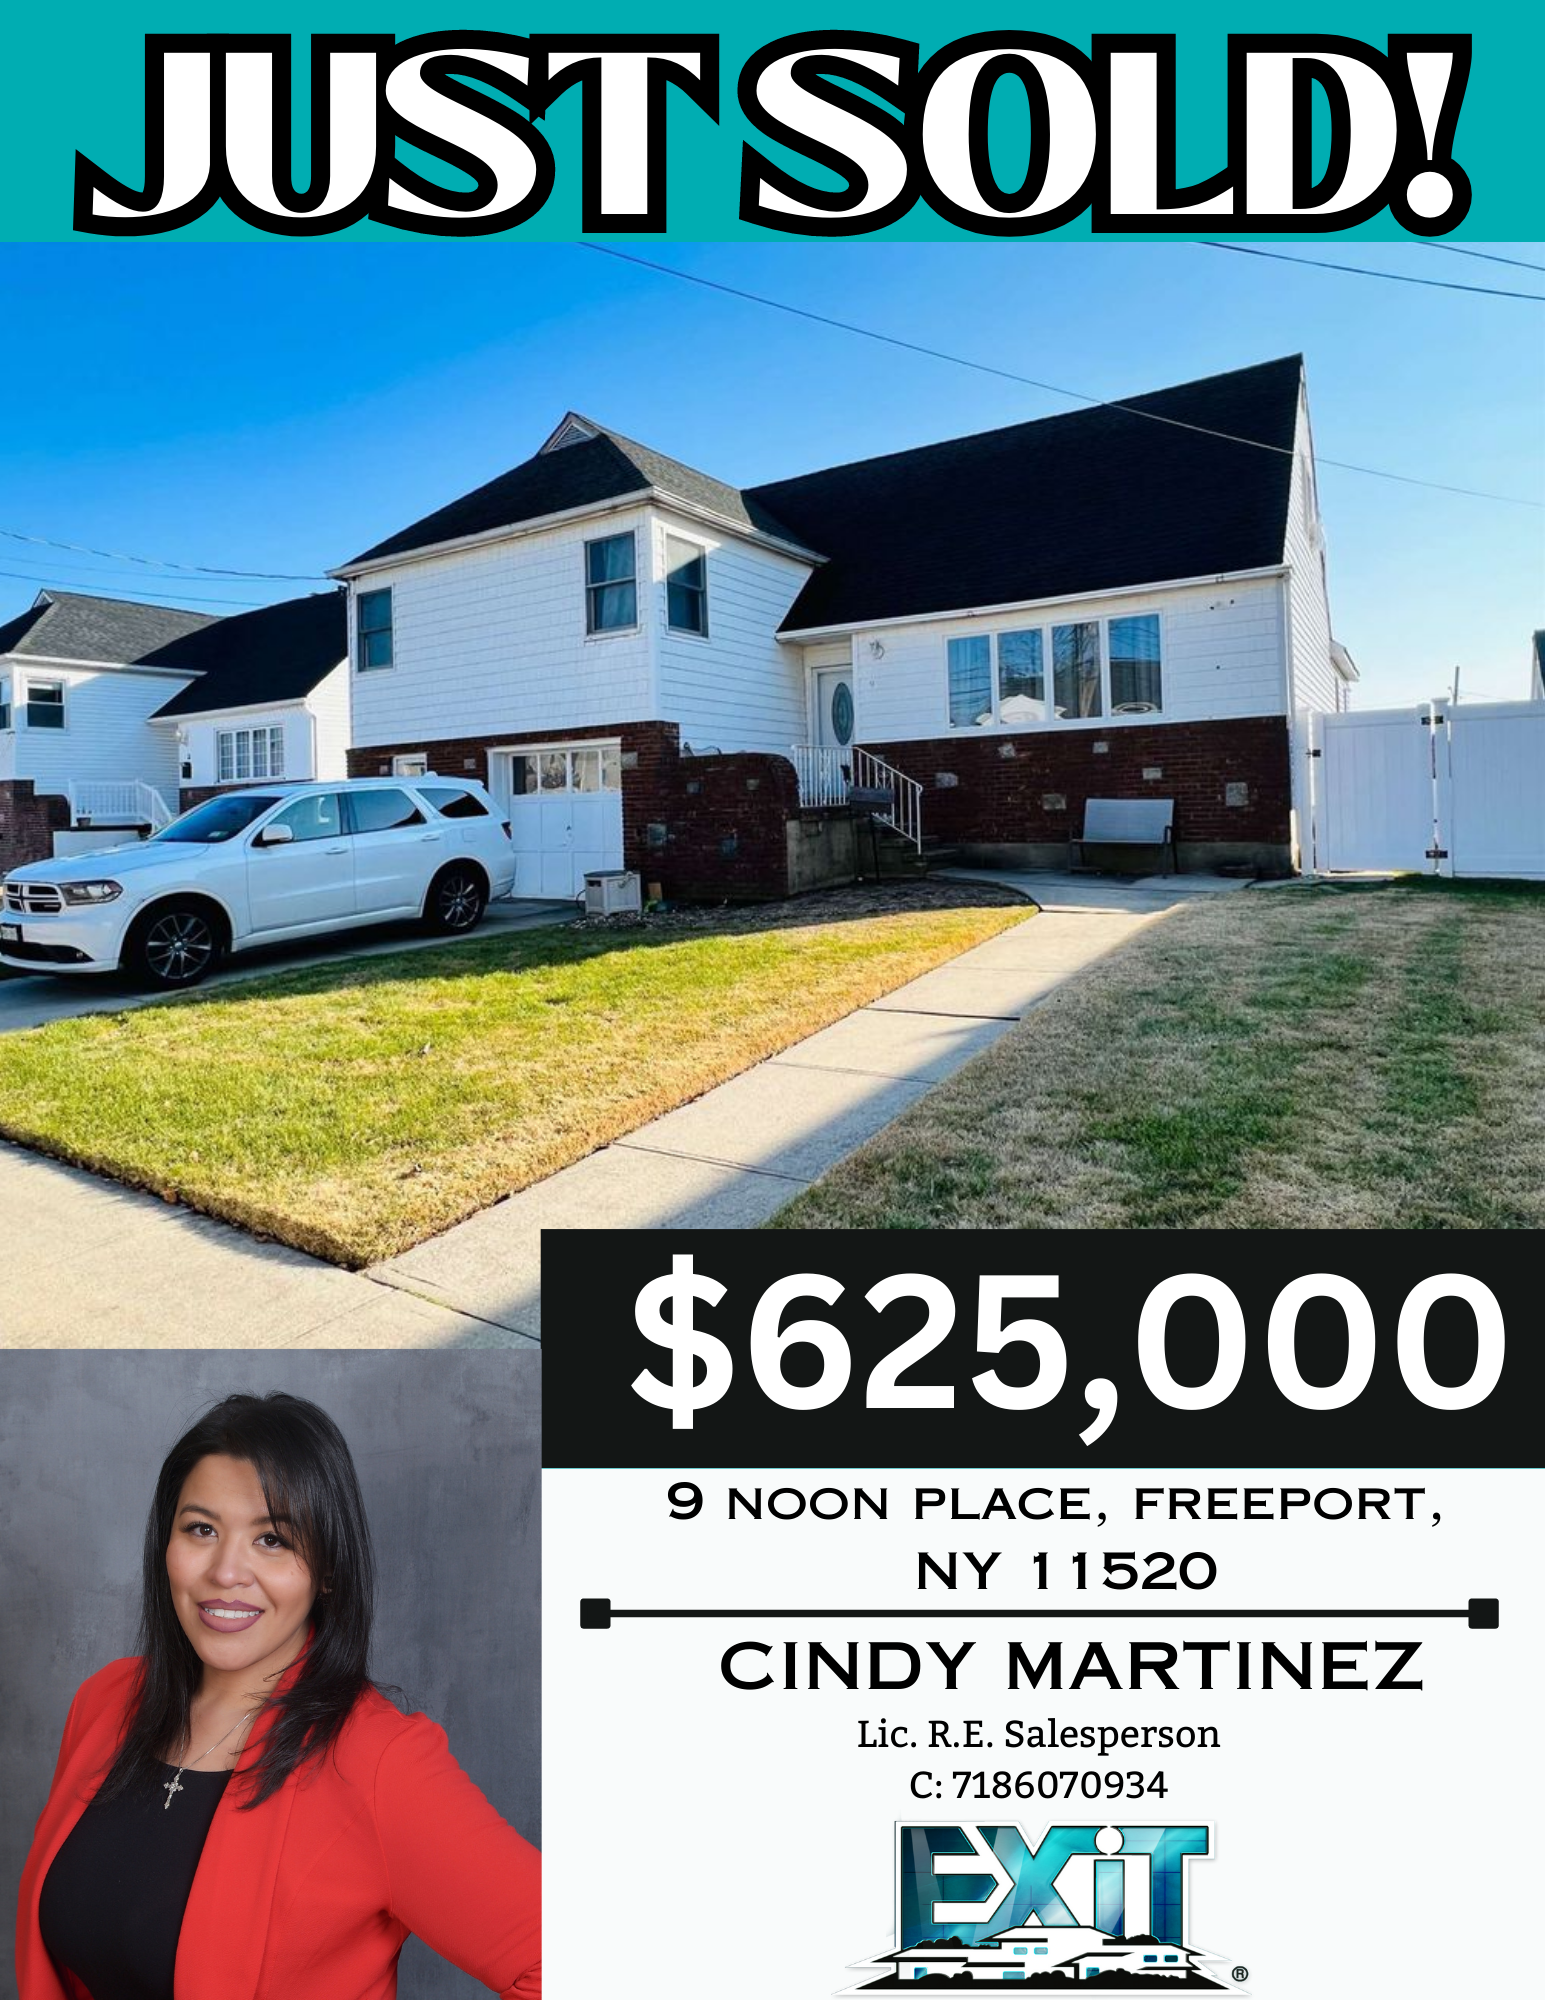 Just Sold by Cindy Martinez in Freeport